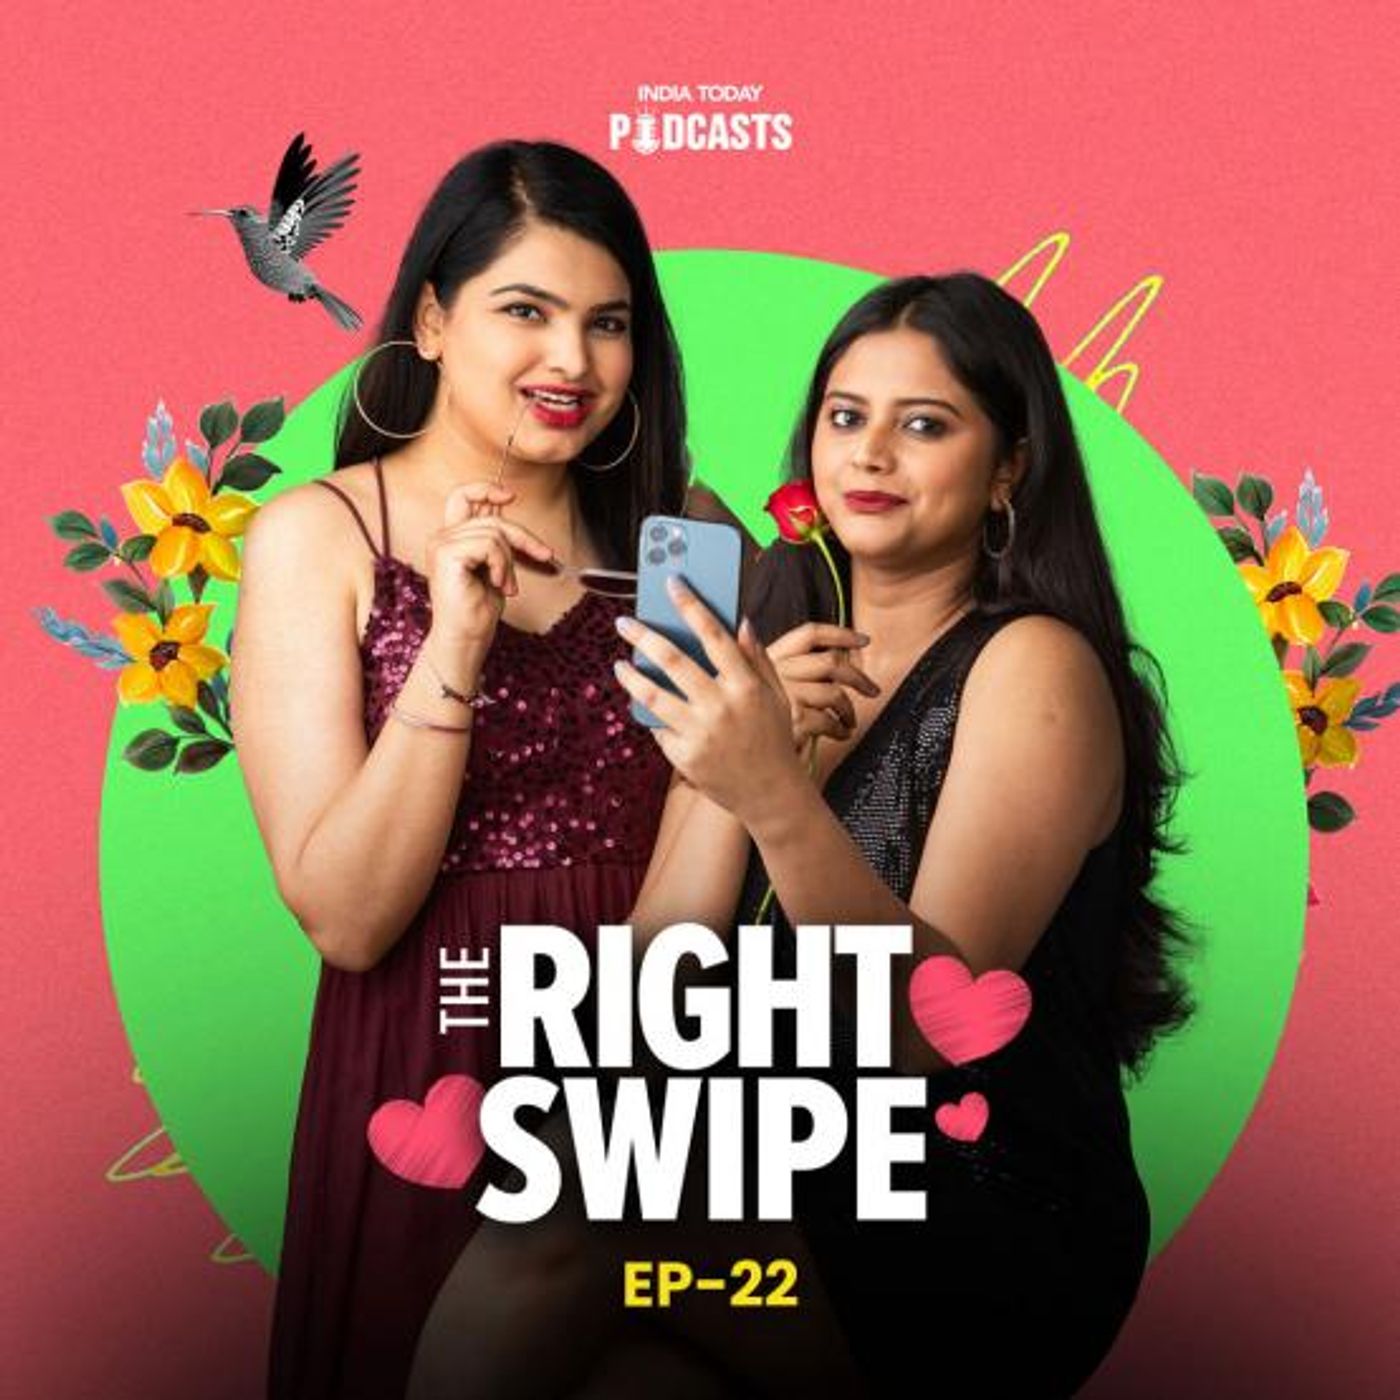 Dating Apps Beyond 'Romance' | The Right Swipe Ep 23